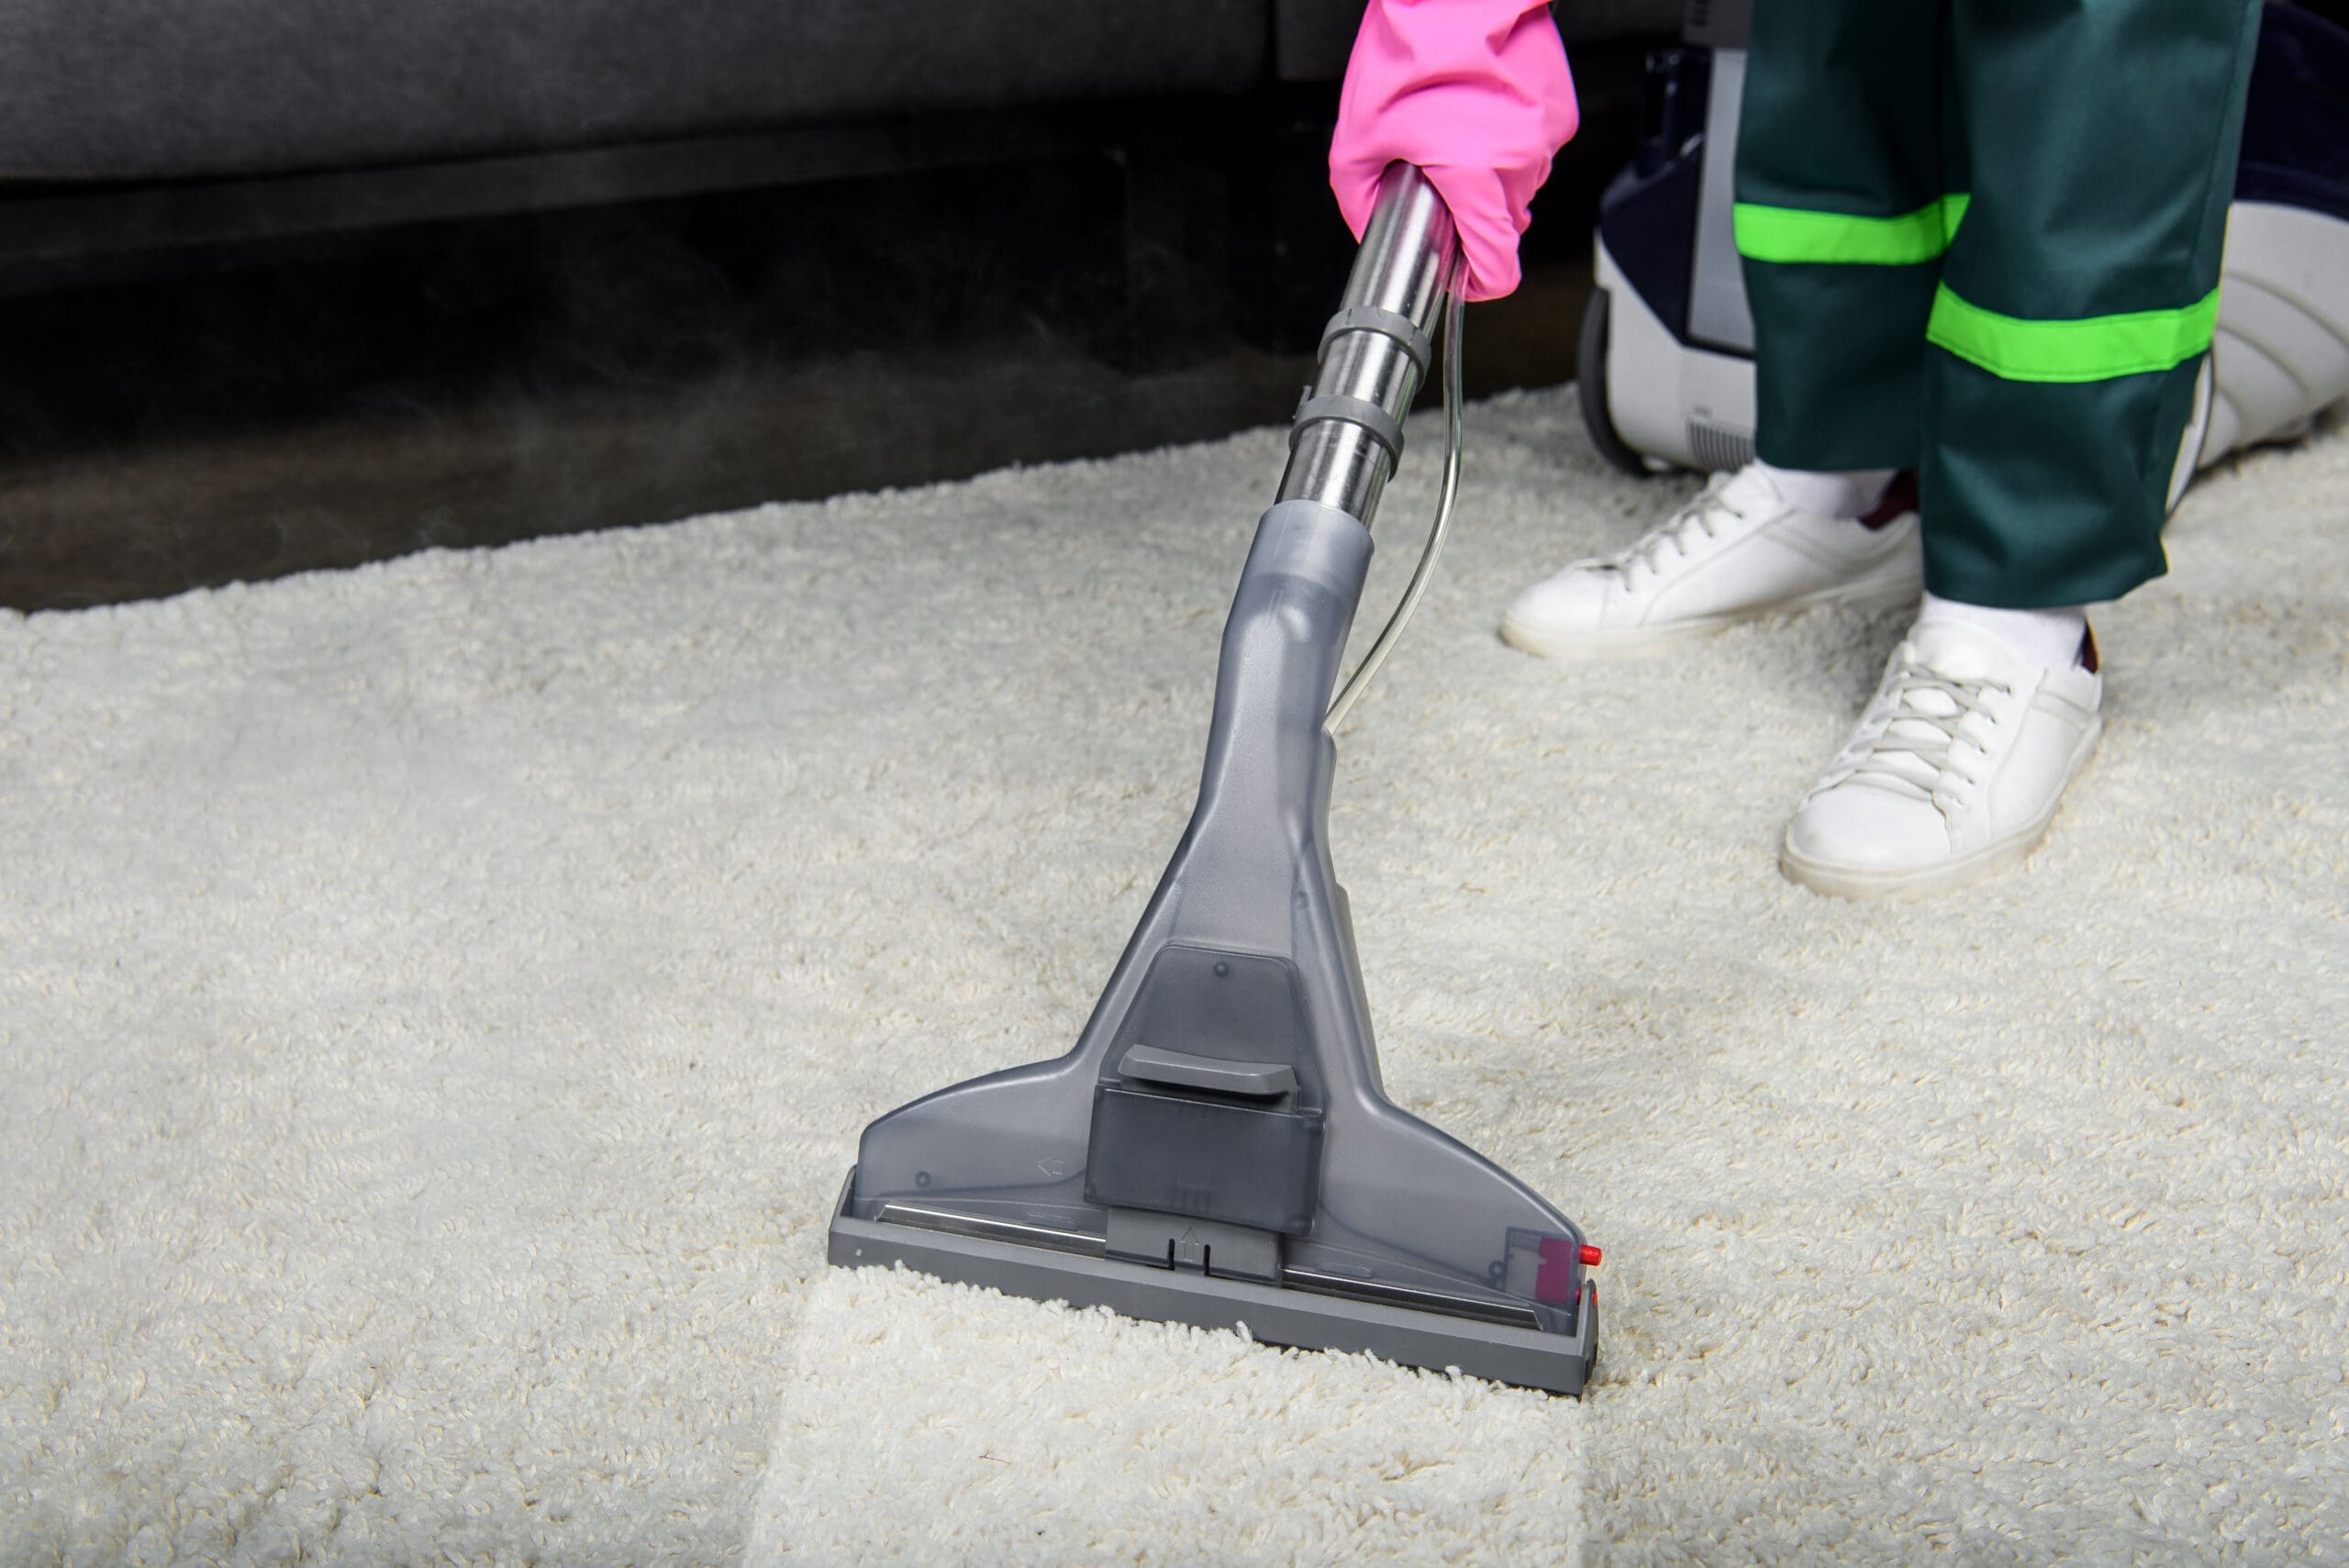 Keep Your Home Fresh and Allergen-Free with Carpet Cleaning Services